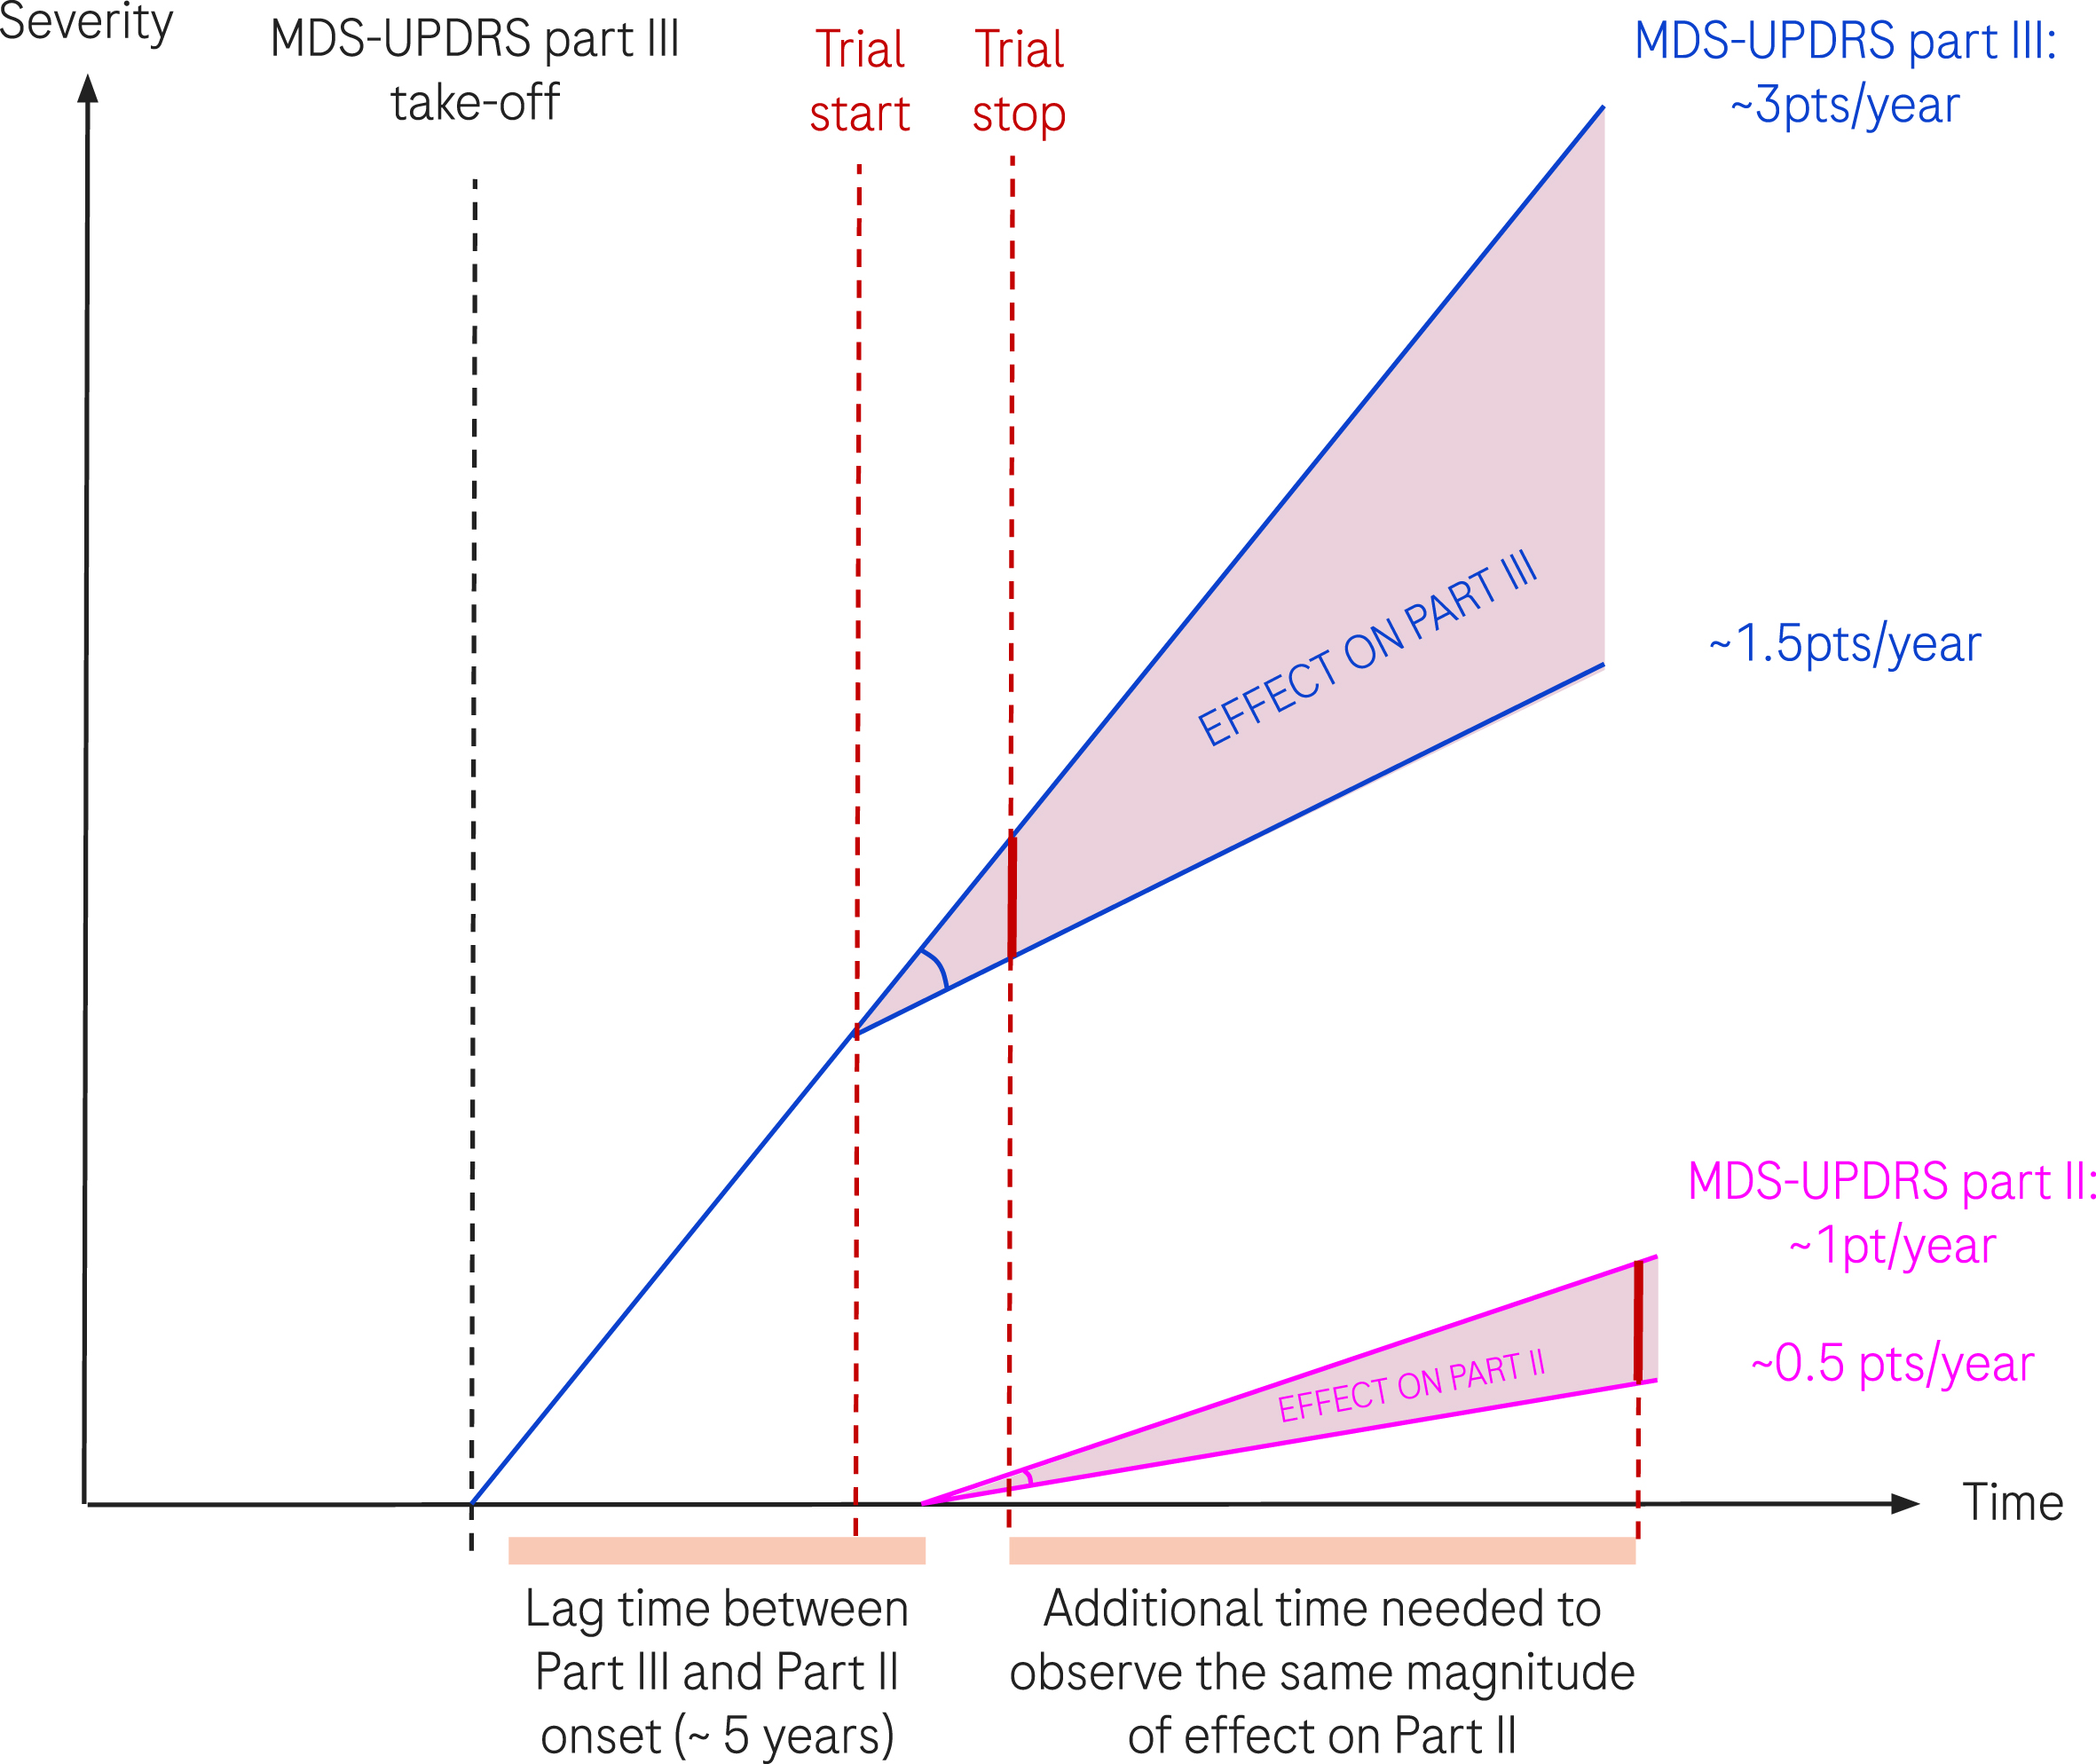 Schematic representation of disease progression and effect of a hypothetical DMT treatment. We represent the progression of MDS-UPDRS part III and part II in thin dark blue and pink lines respectively. An effective treatment affects progression by a given factor, taken here at 0.5 (50% reduction of progression). The translation of the same factor to MDS-UPDRS part III and part II results in different absolute treatment effects due to the difference in natural progression (3 points/year versus 1 point/year). The two vertical red dotted lines represent the start and end of a hypothetical clinical trial.